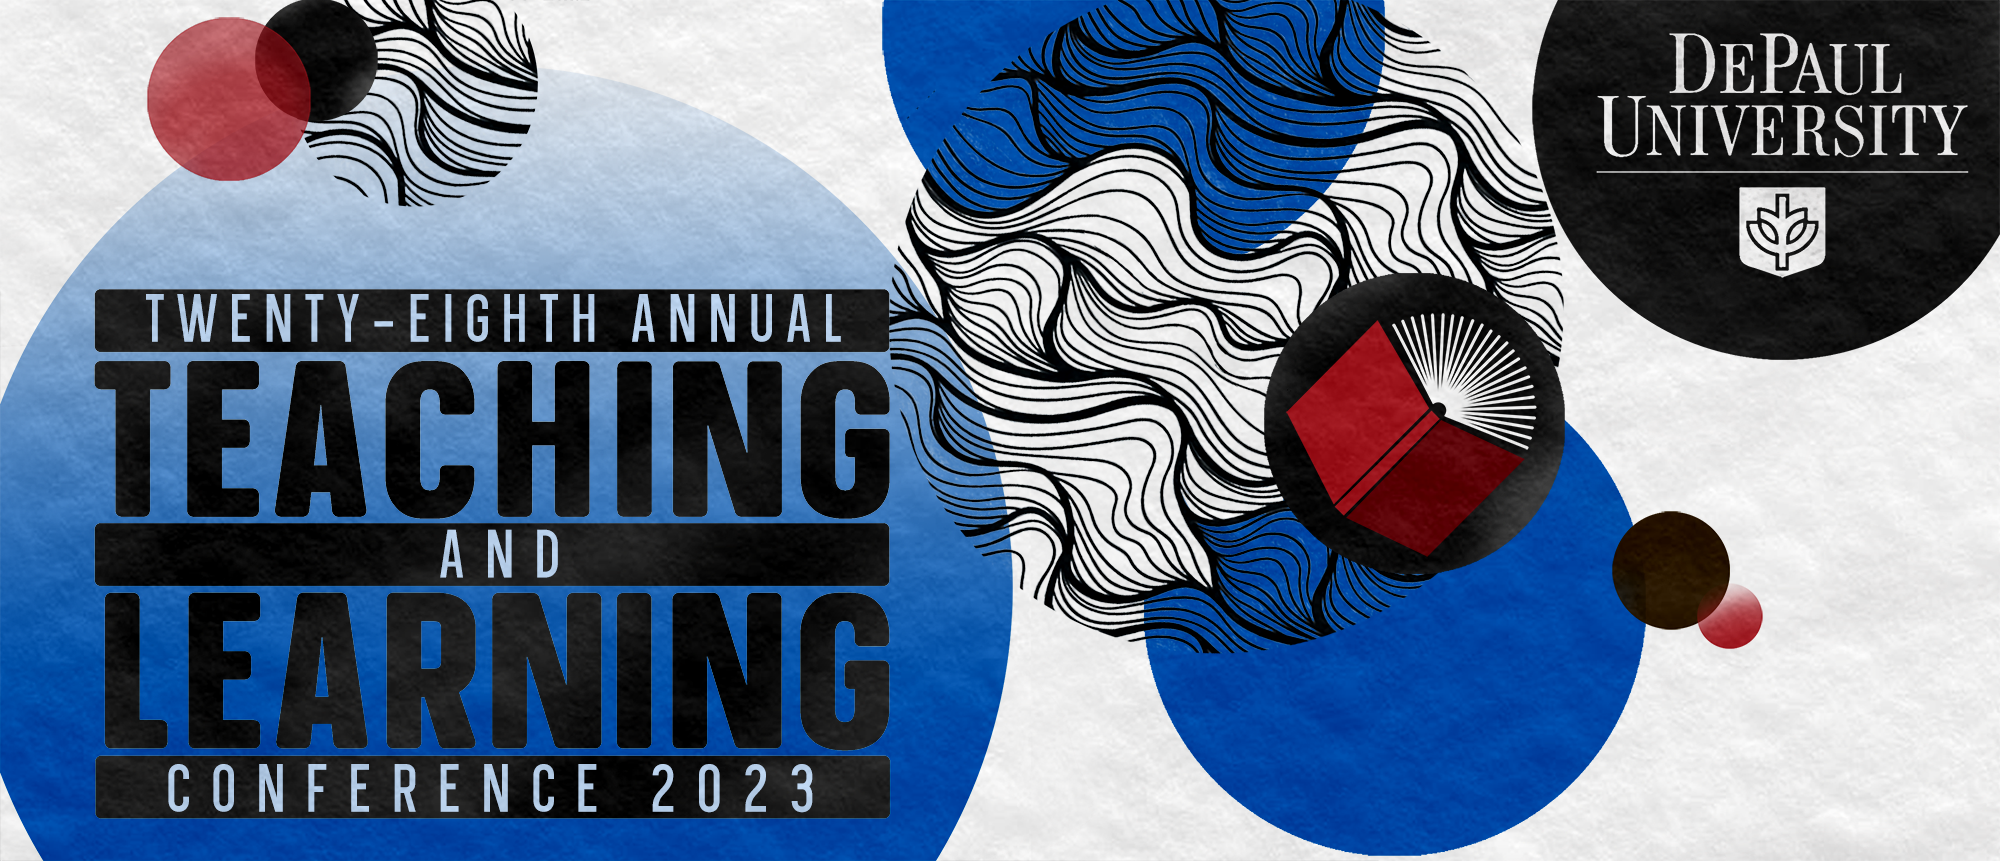 The 28th Annual Teaching and Learning Conference 2023